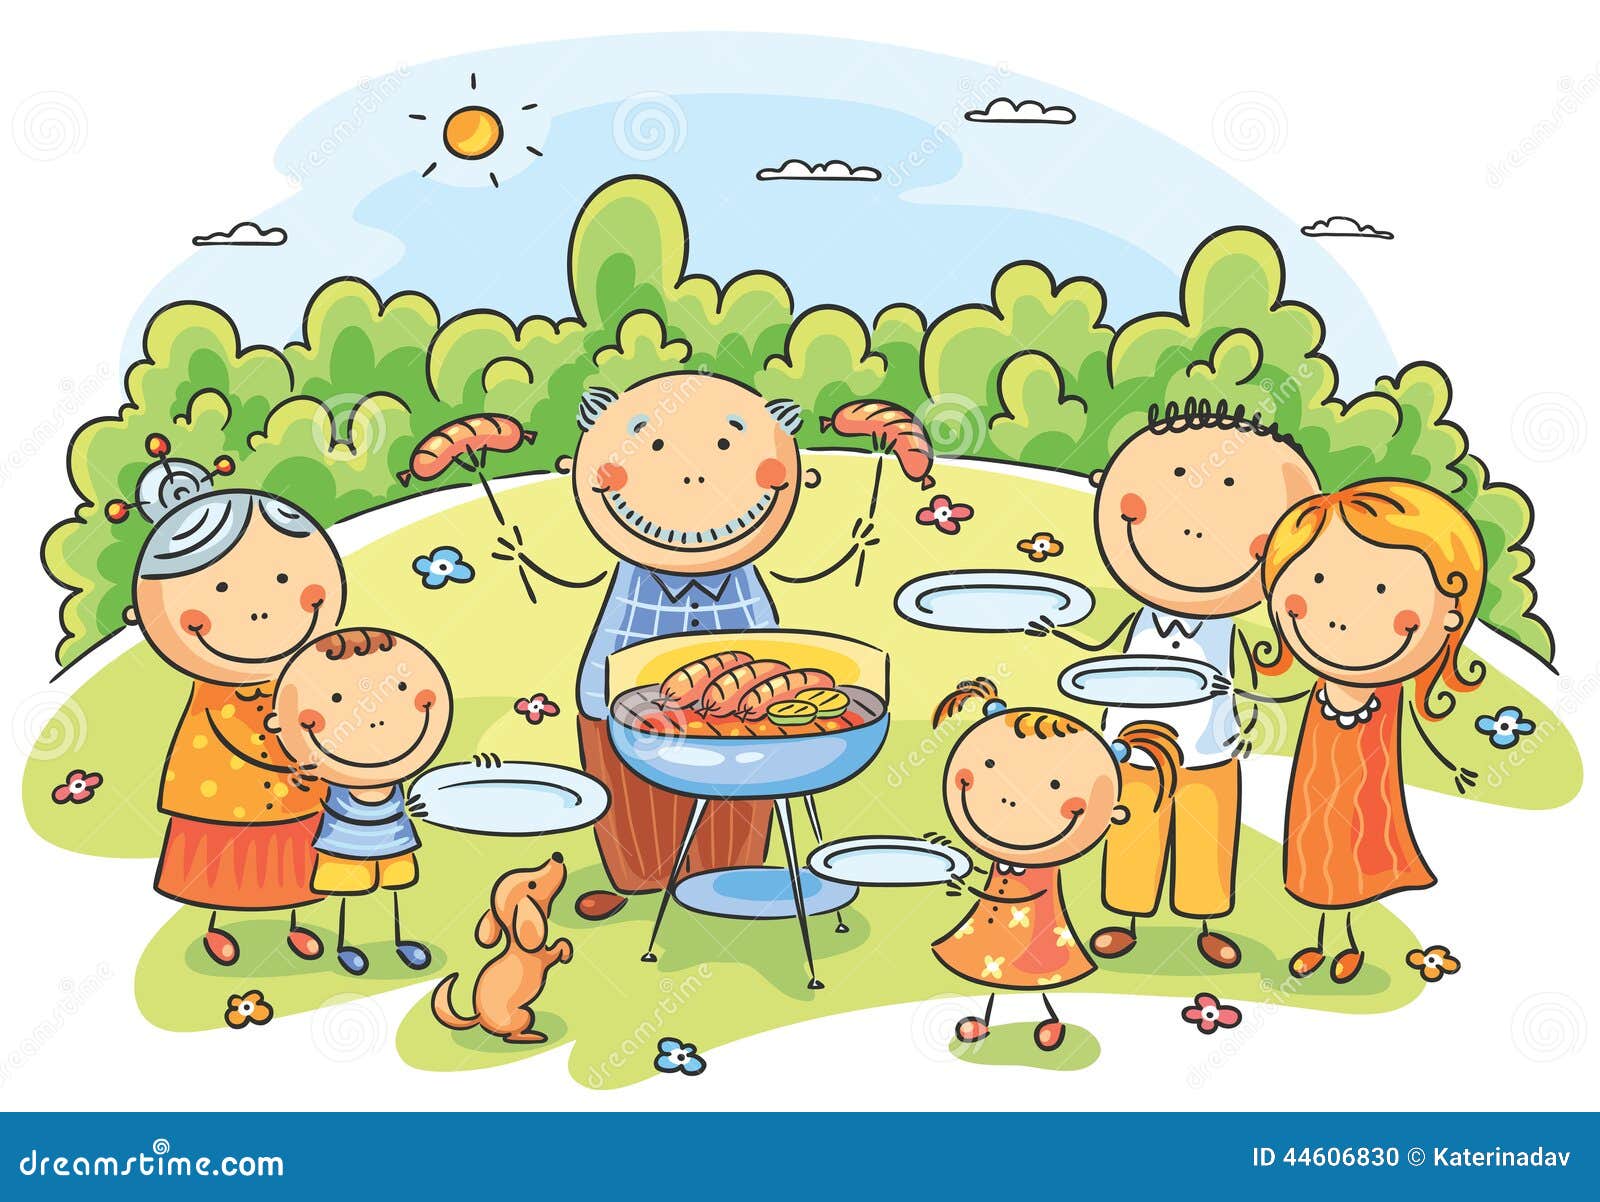 free clipart for family picnic - photo #38